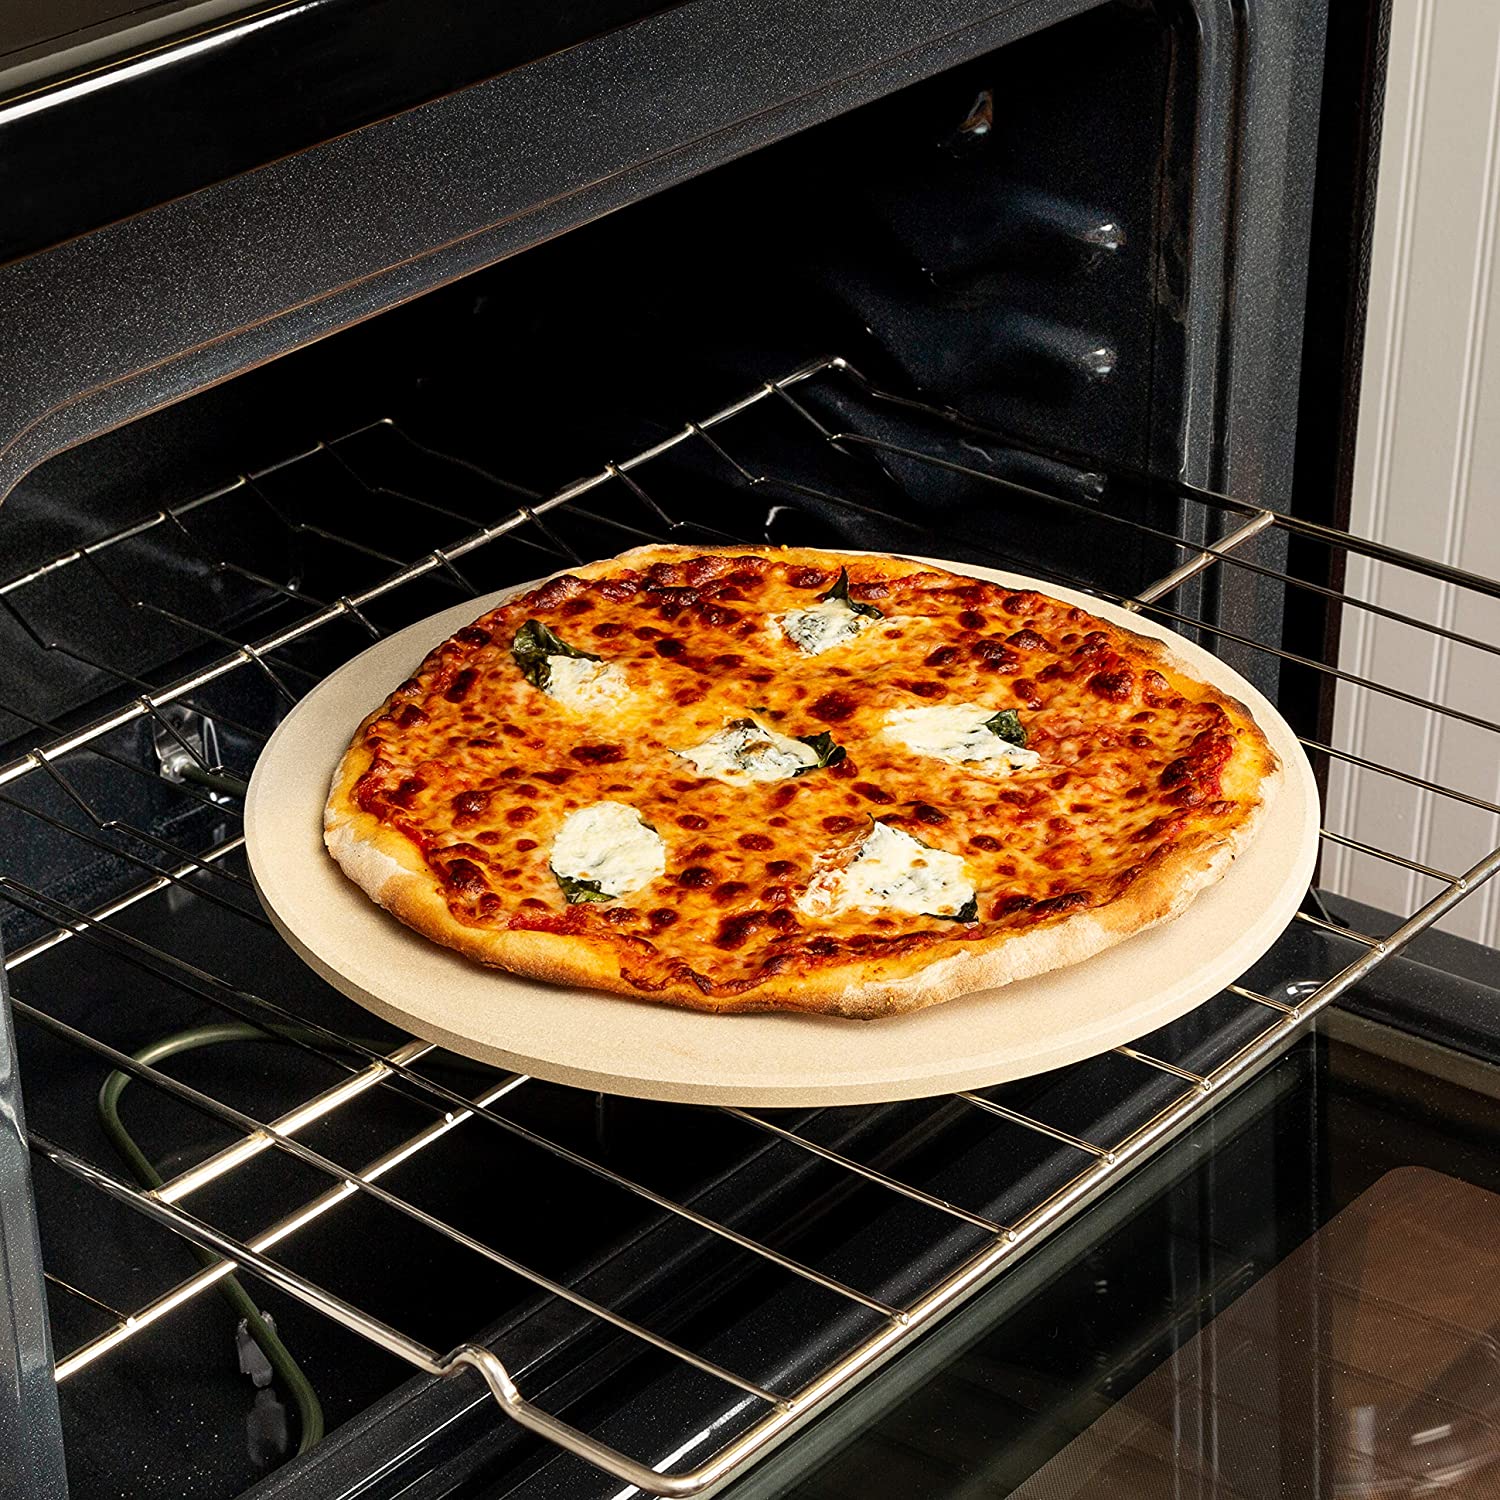 Honey-Can-Do Pizza Stone, 14" $13 shipped w/ Prime